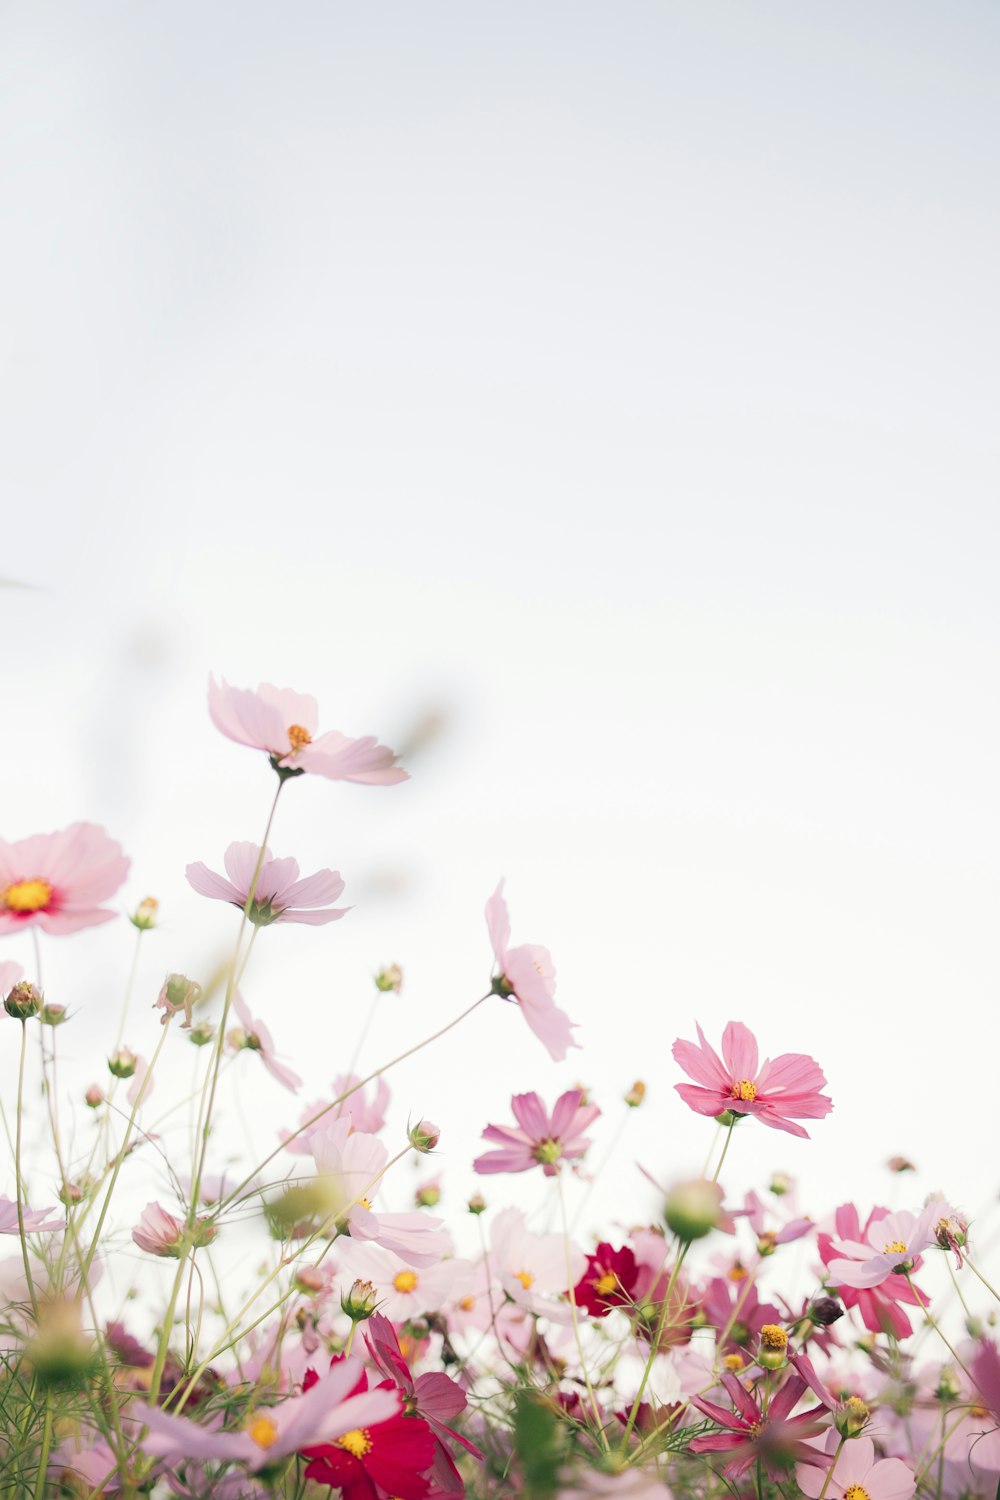 Spring Wallpapers Free Hd